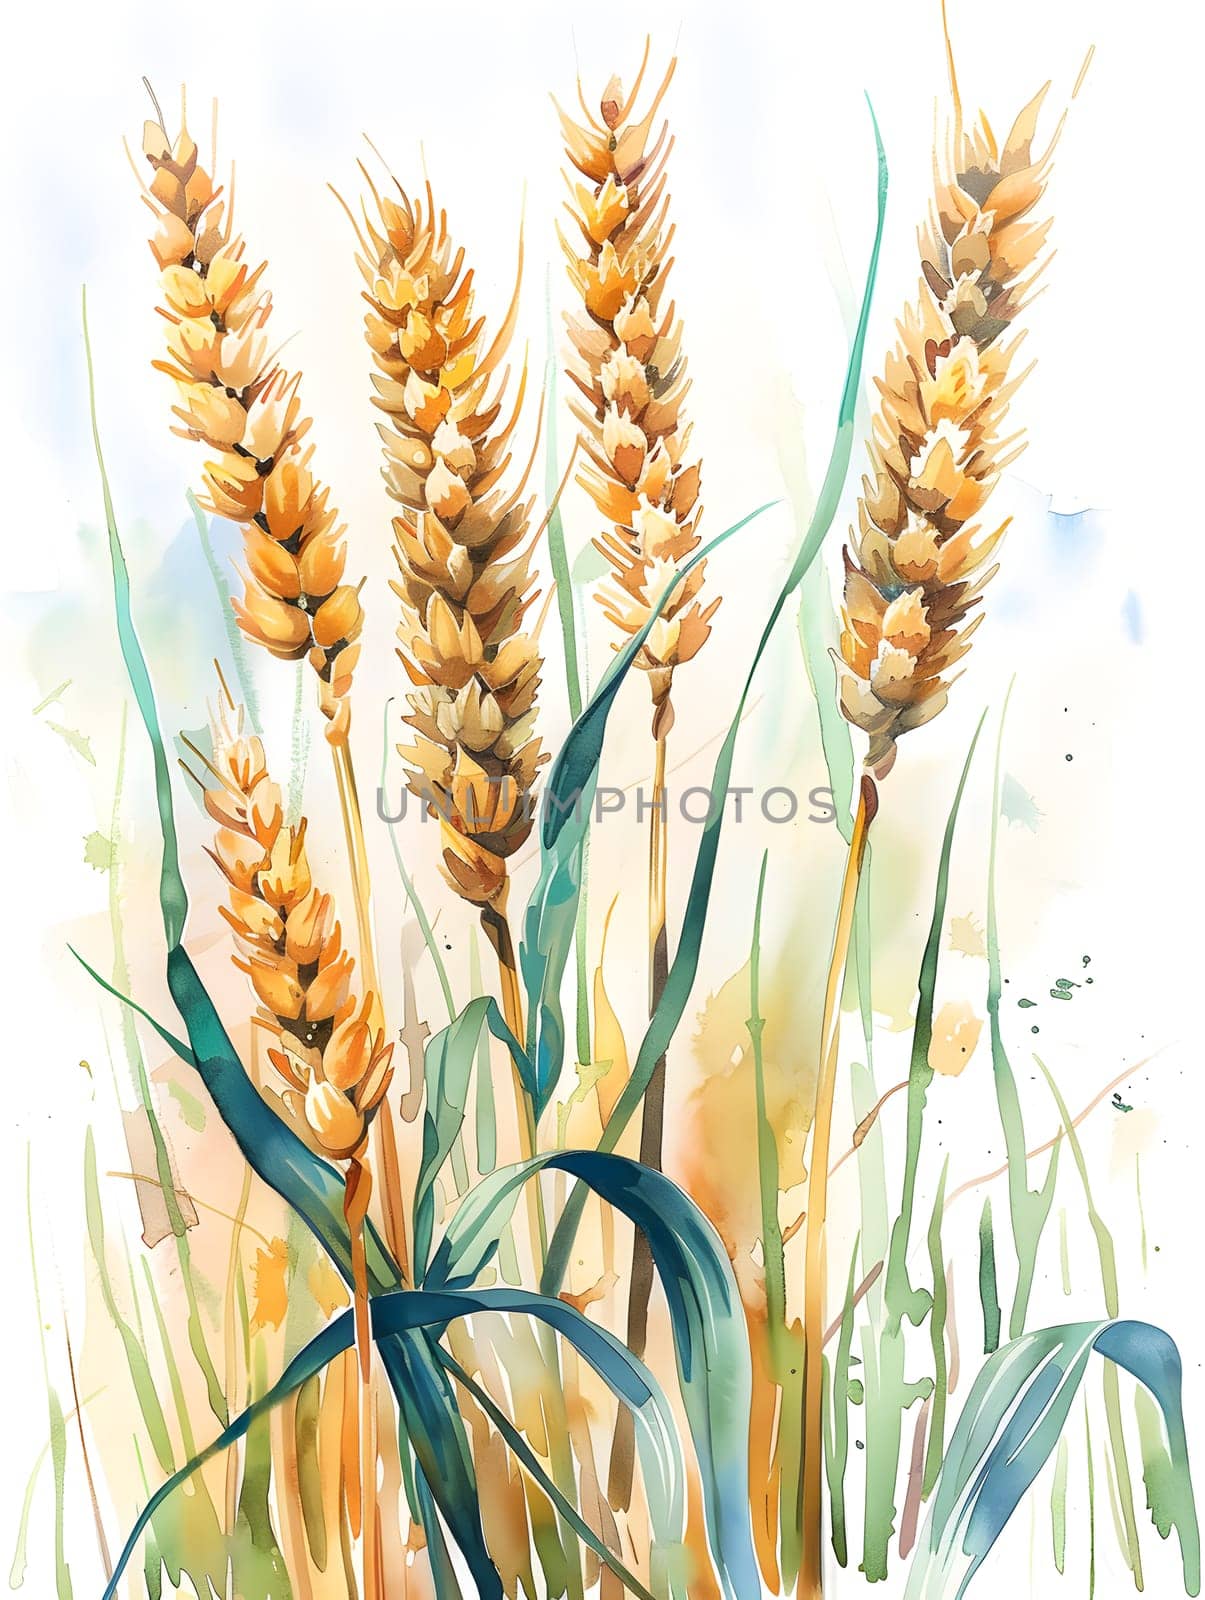 A watercolor depiction of wheat ears standing tall in a field by Nadtochiy